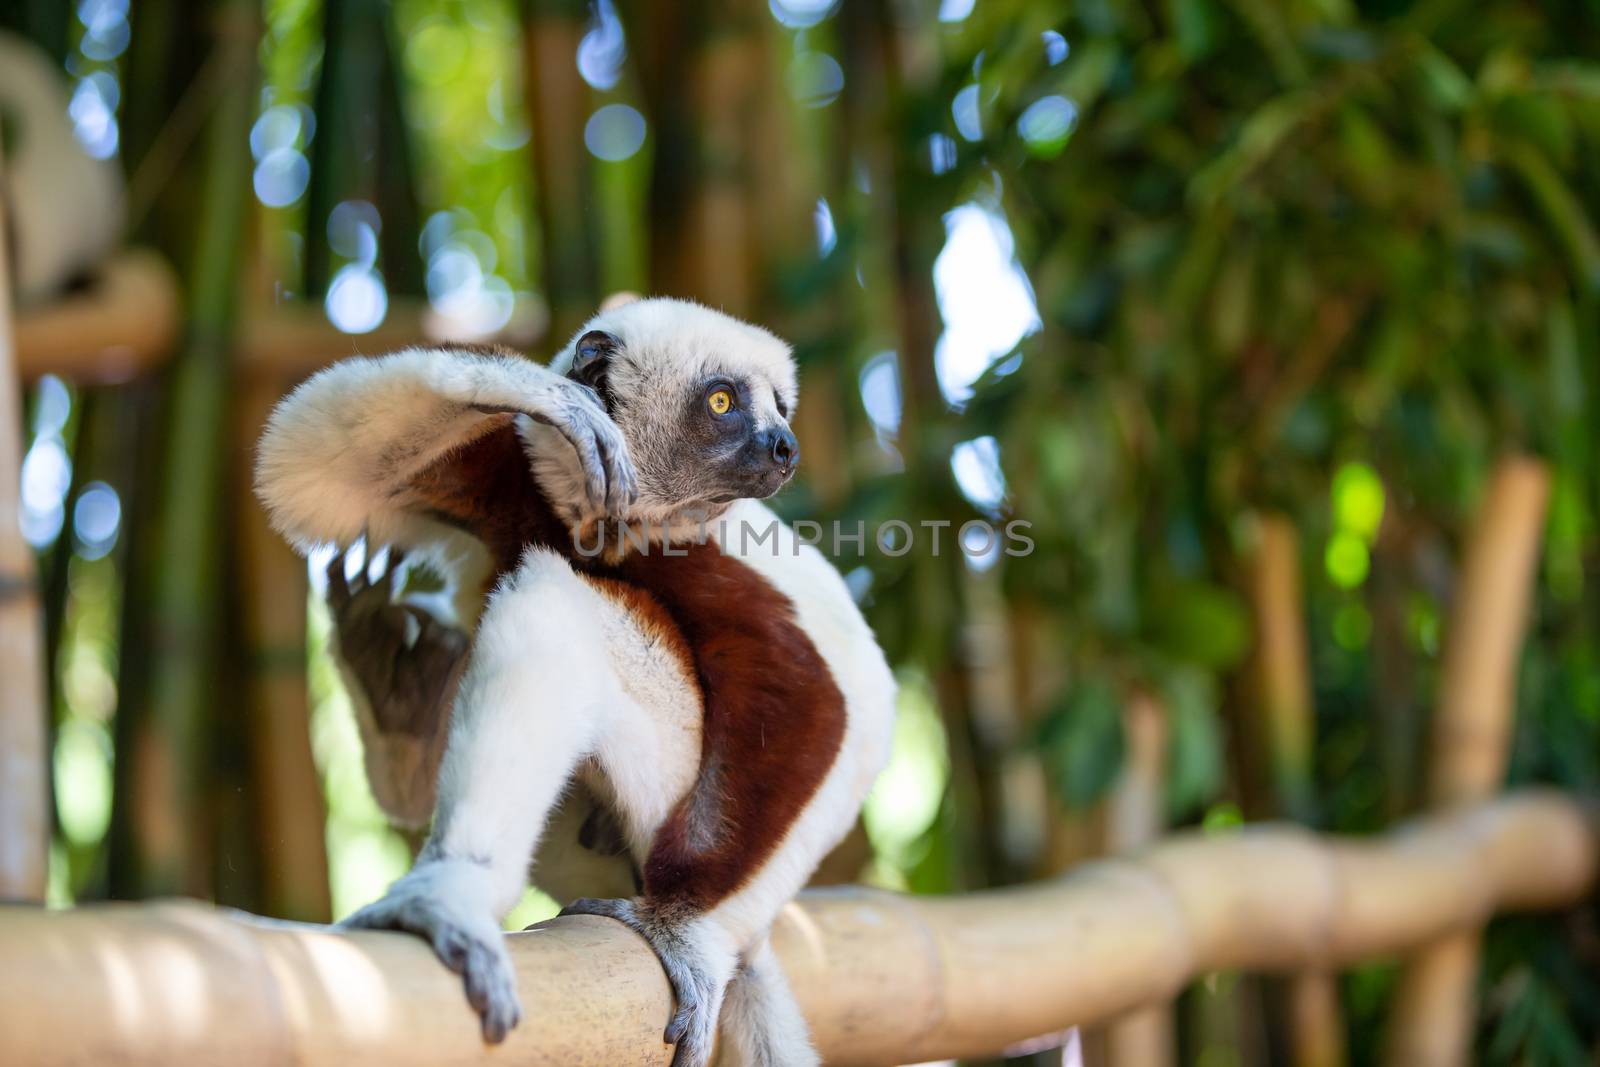 The Coquerel Sifaka in its natural environment in a national park on the island of Madagascar by 25ehaag6